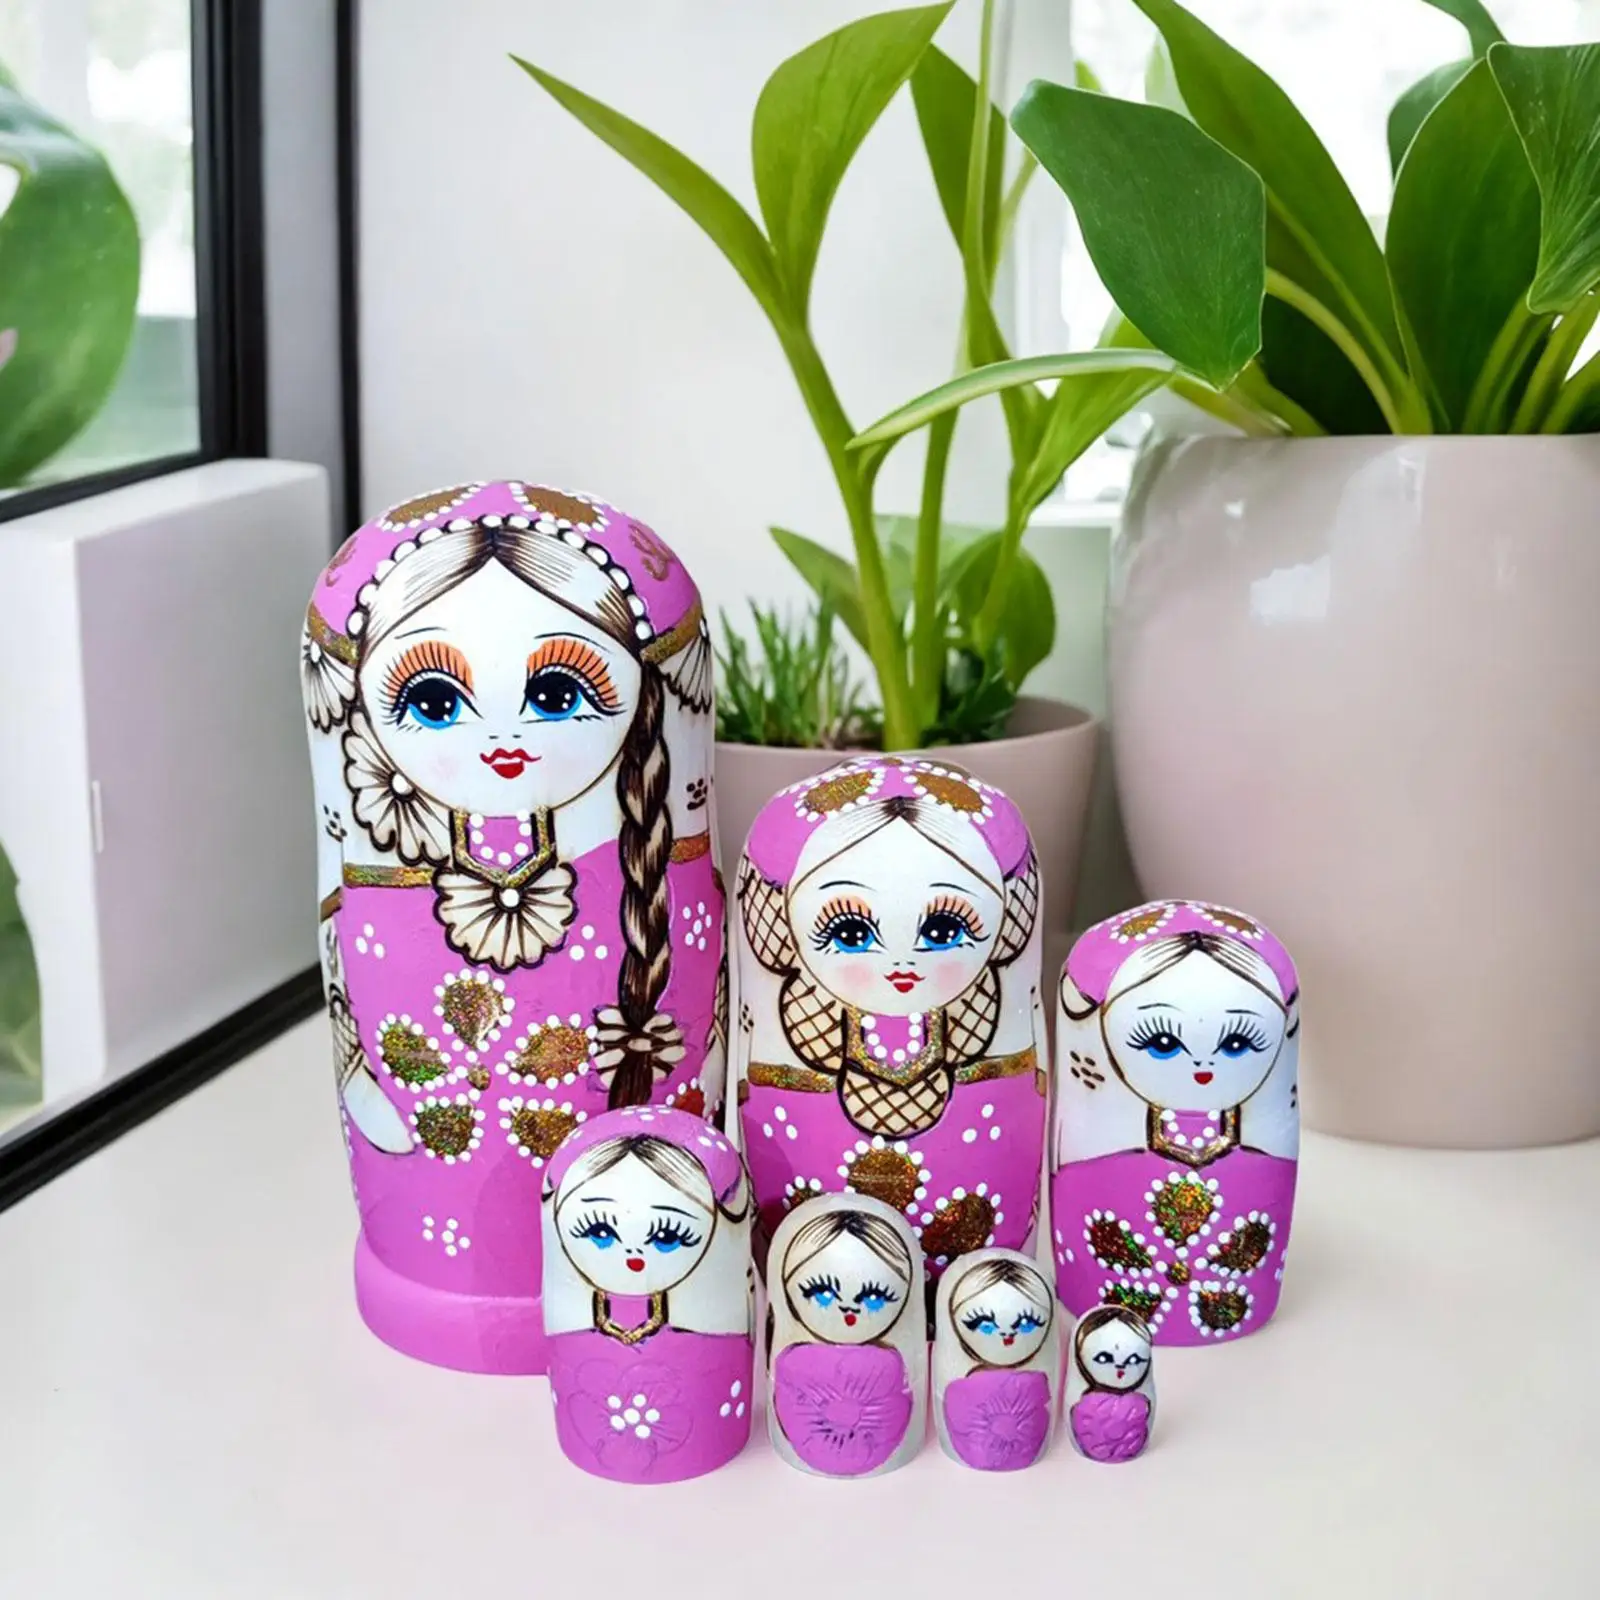 7Pcs Russian Nesting Dolls Cute Holiday Collectible Handpainted Decoration